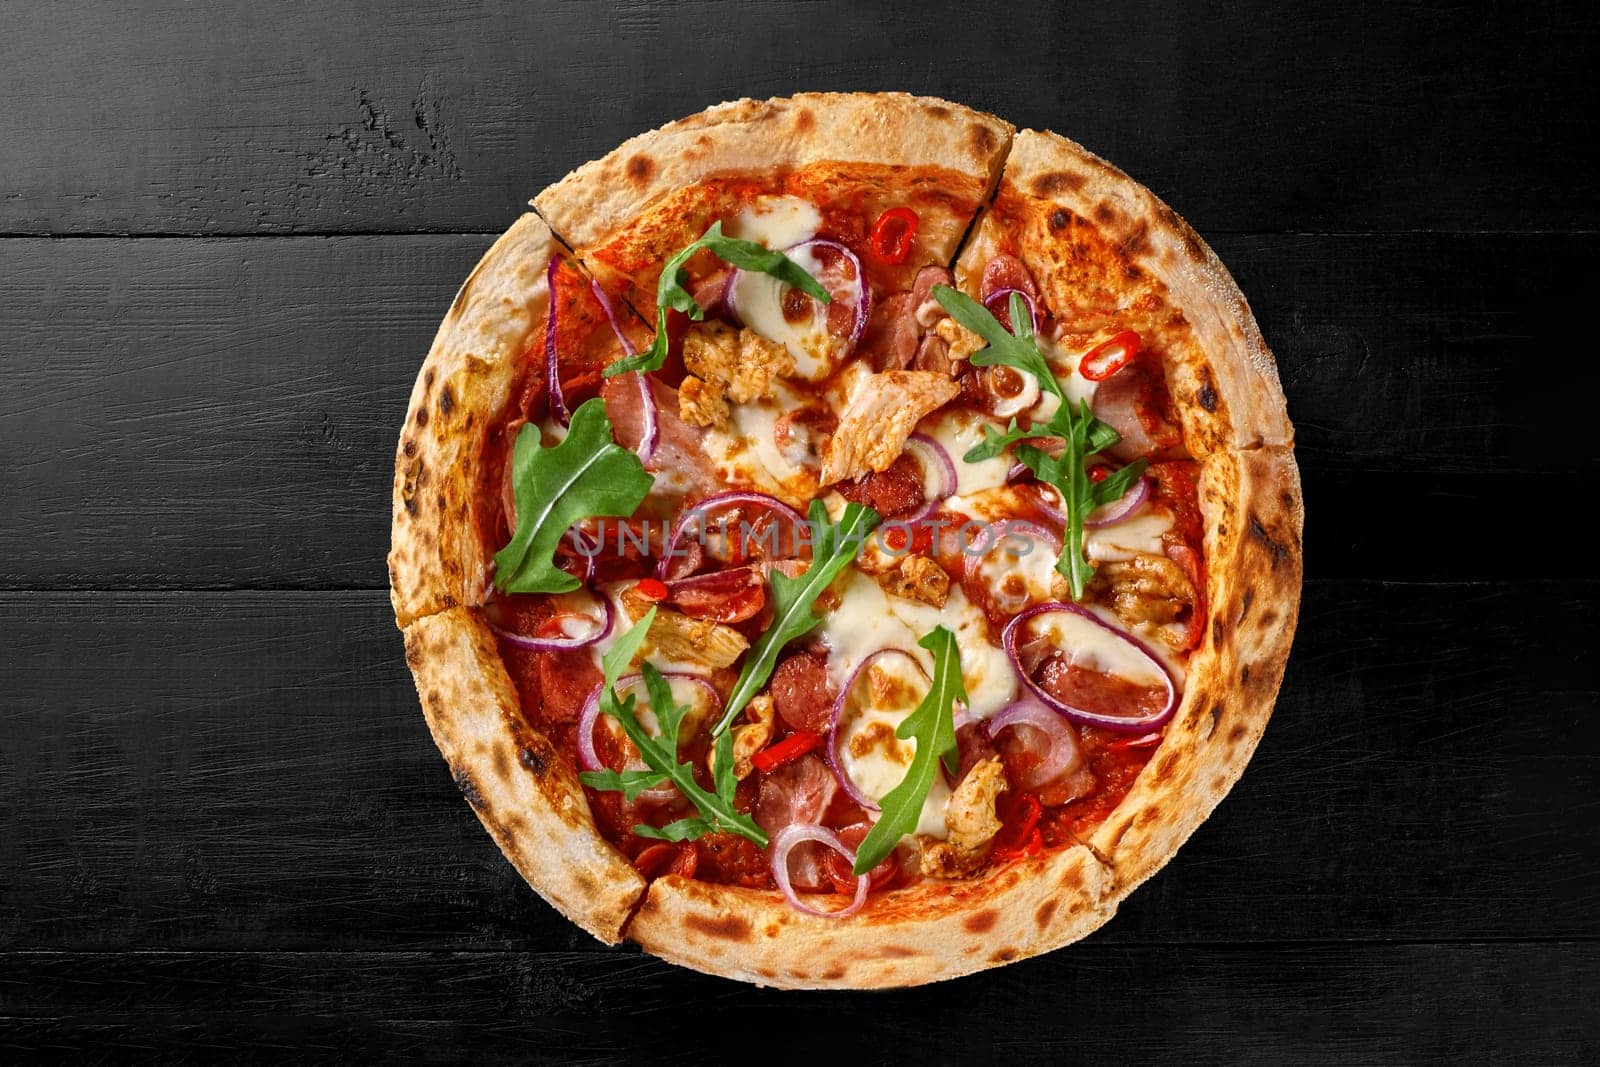 Appetizing browned pizza with chicken fillet, bacon, salami, hunting sausages, chili pepper, onion rings and greens on pelati sauce and melted mozzarella on black wooden background. Italian cuisine